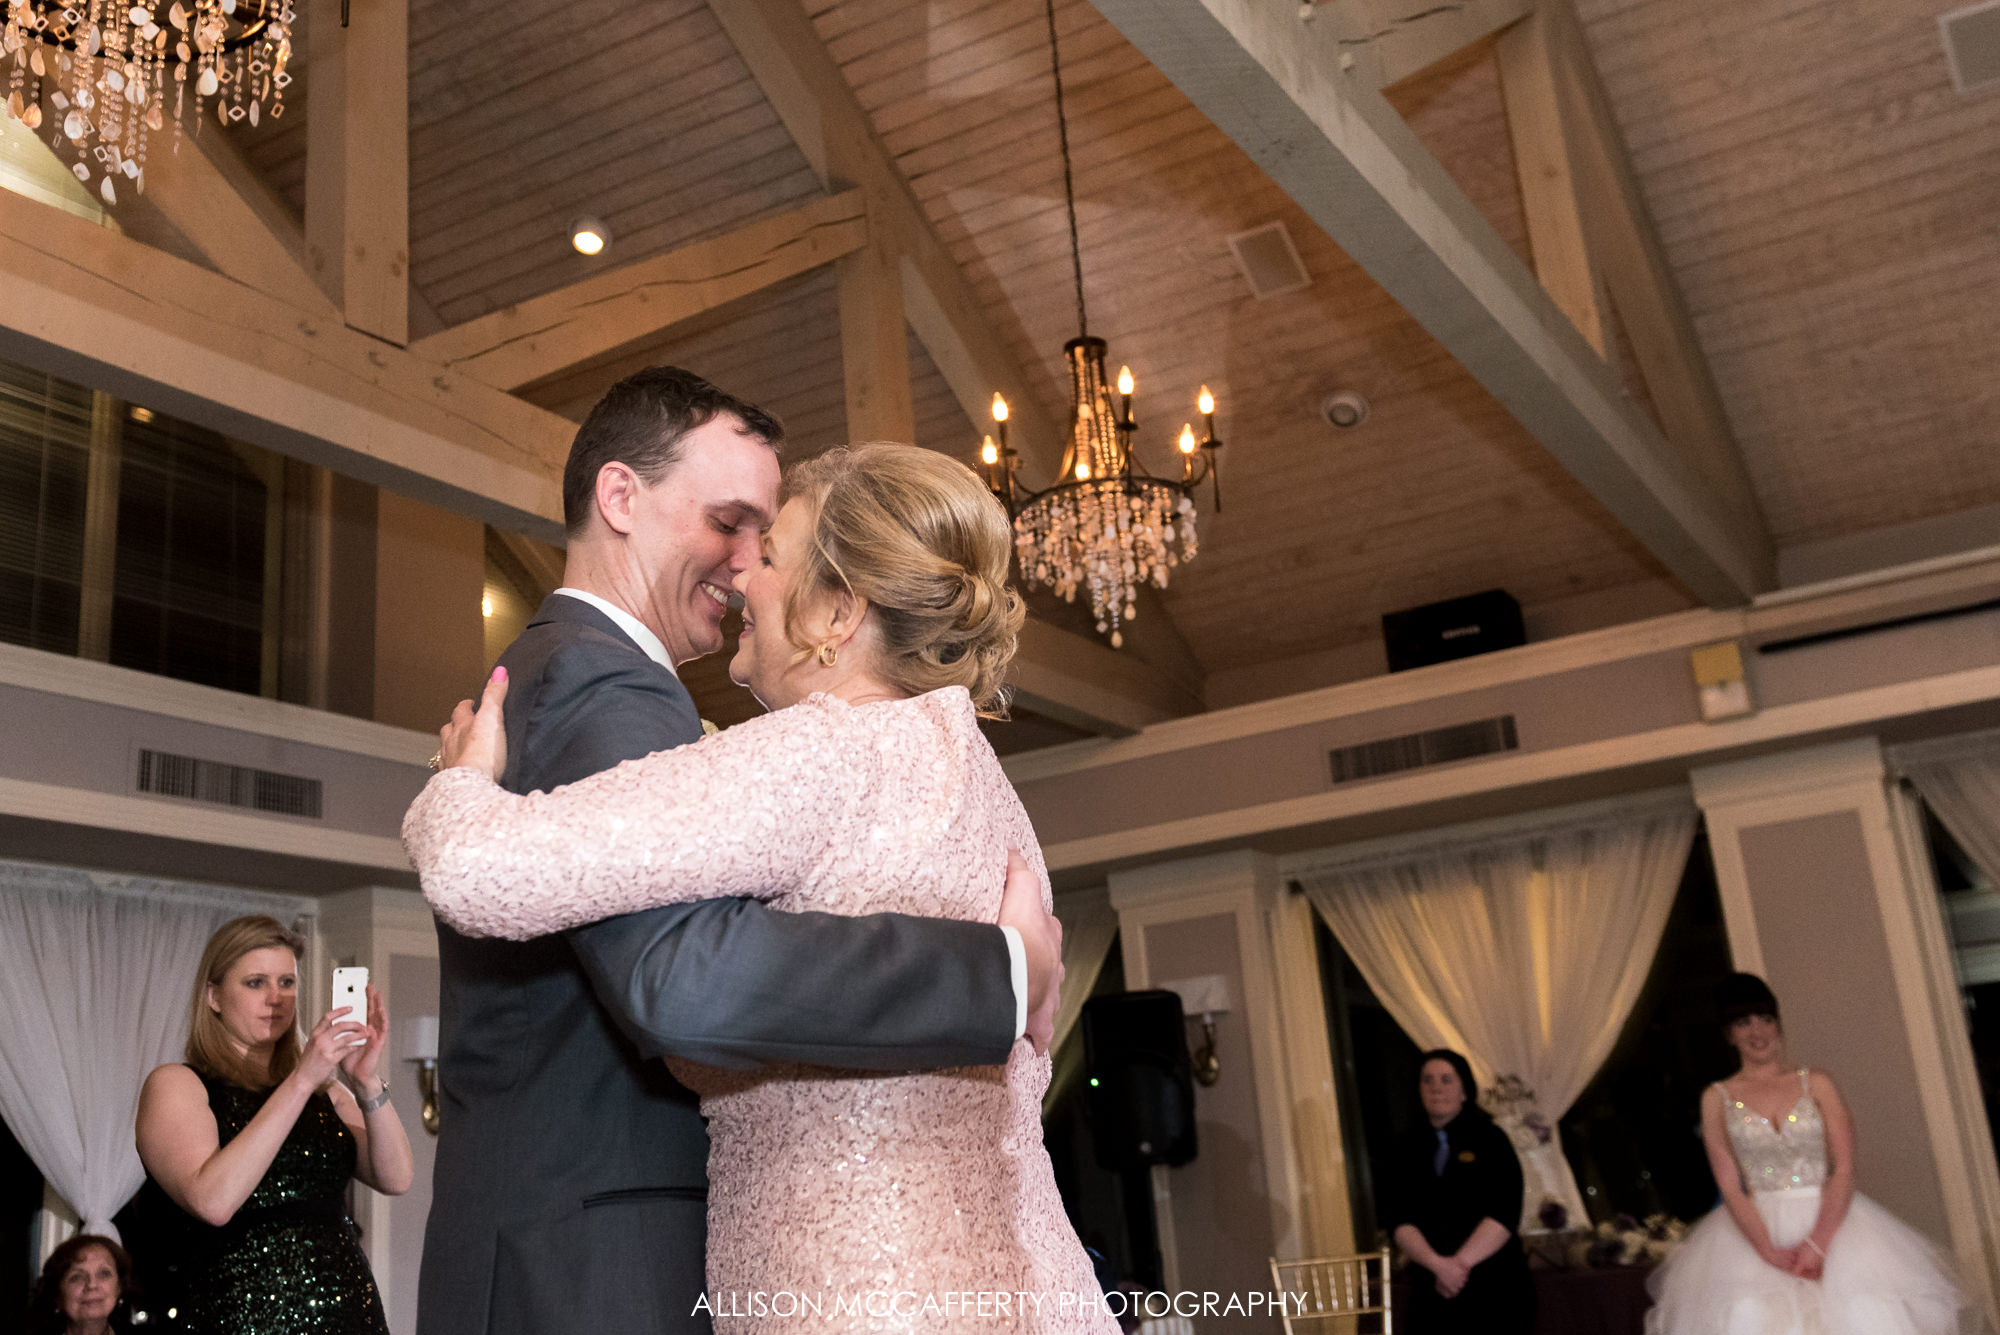 Groom dancing with his Mom at his wedding